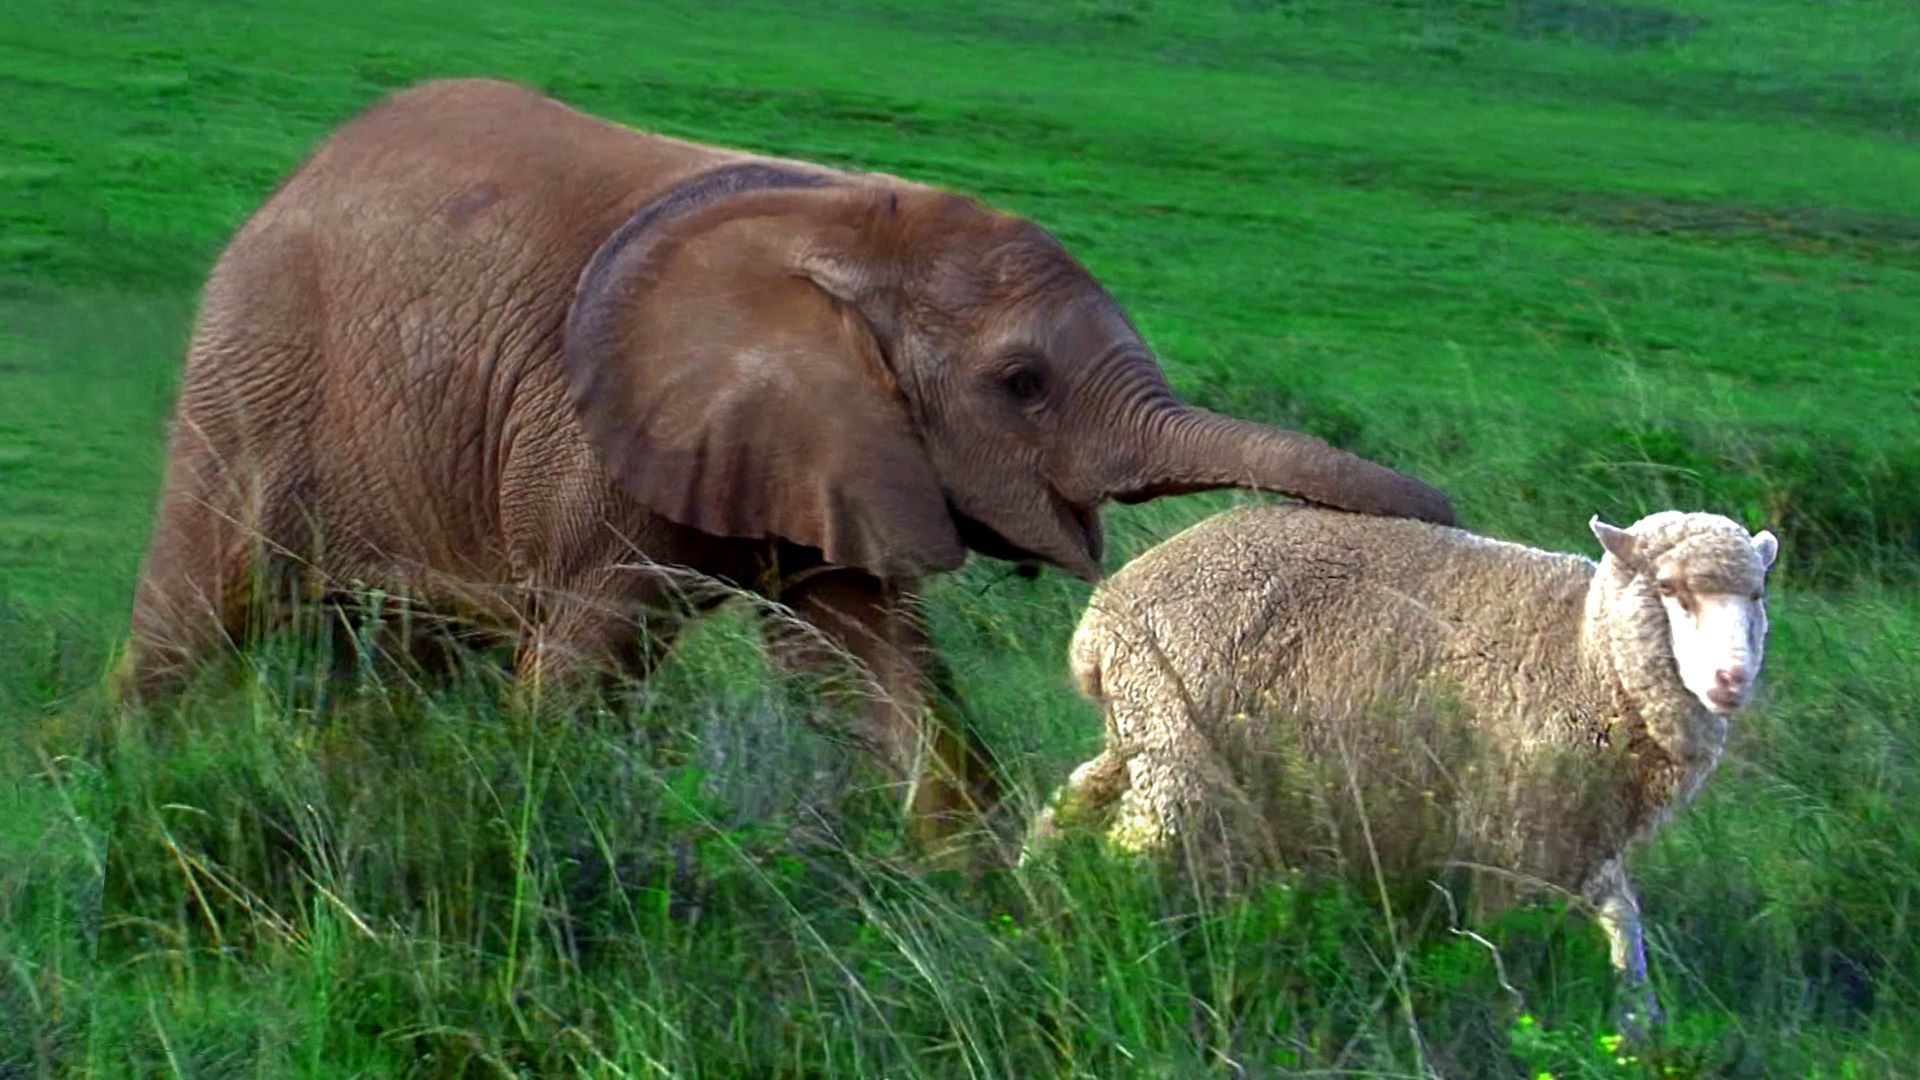 Wild and Woolly: An Amazing Friendship Between Sheep and Elephant